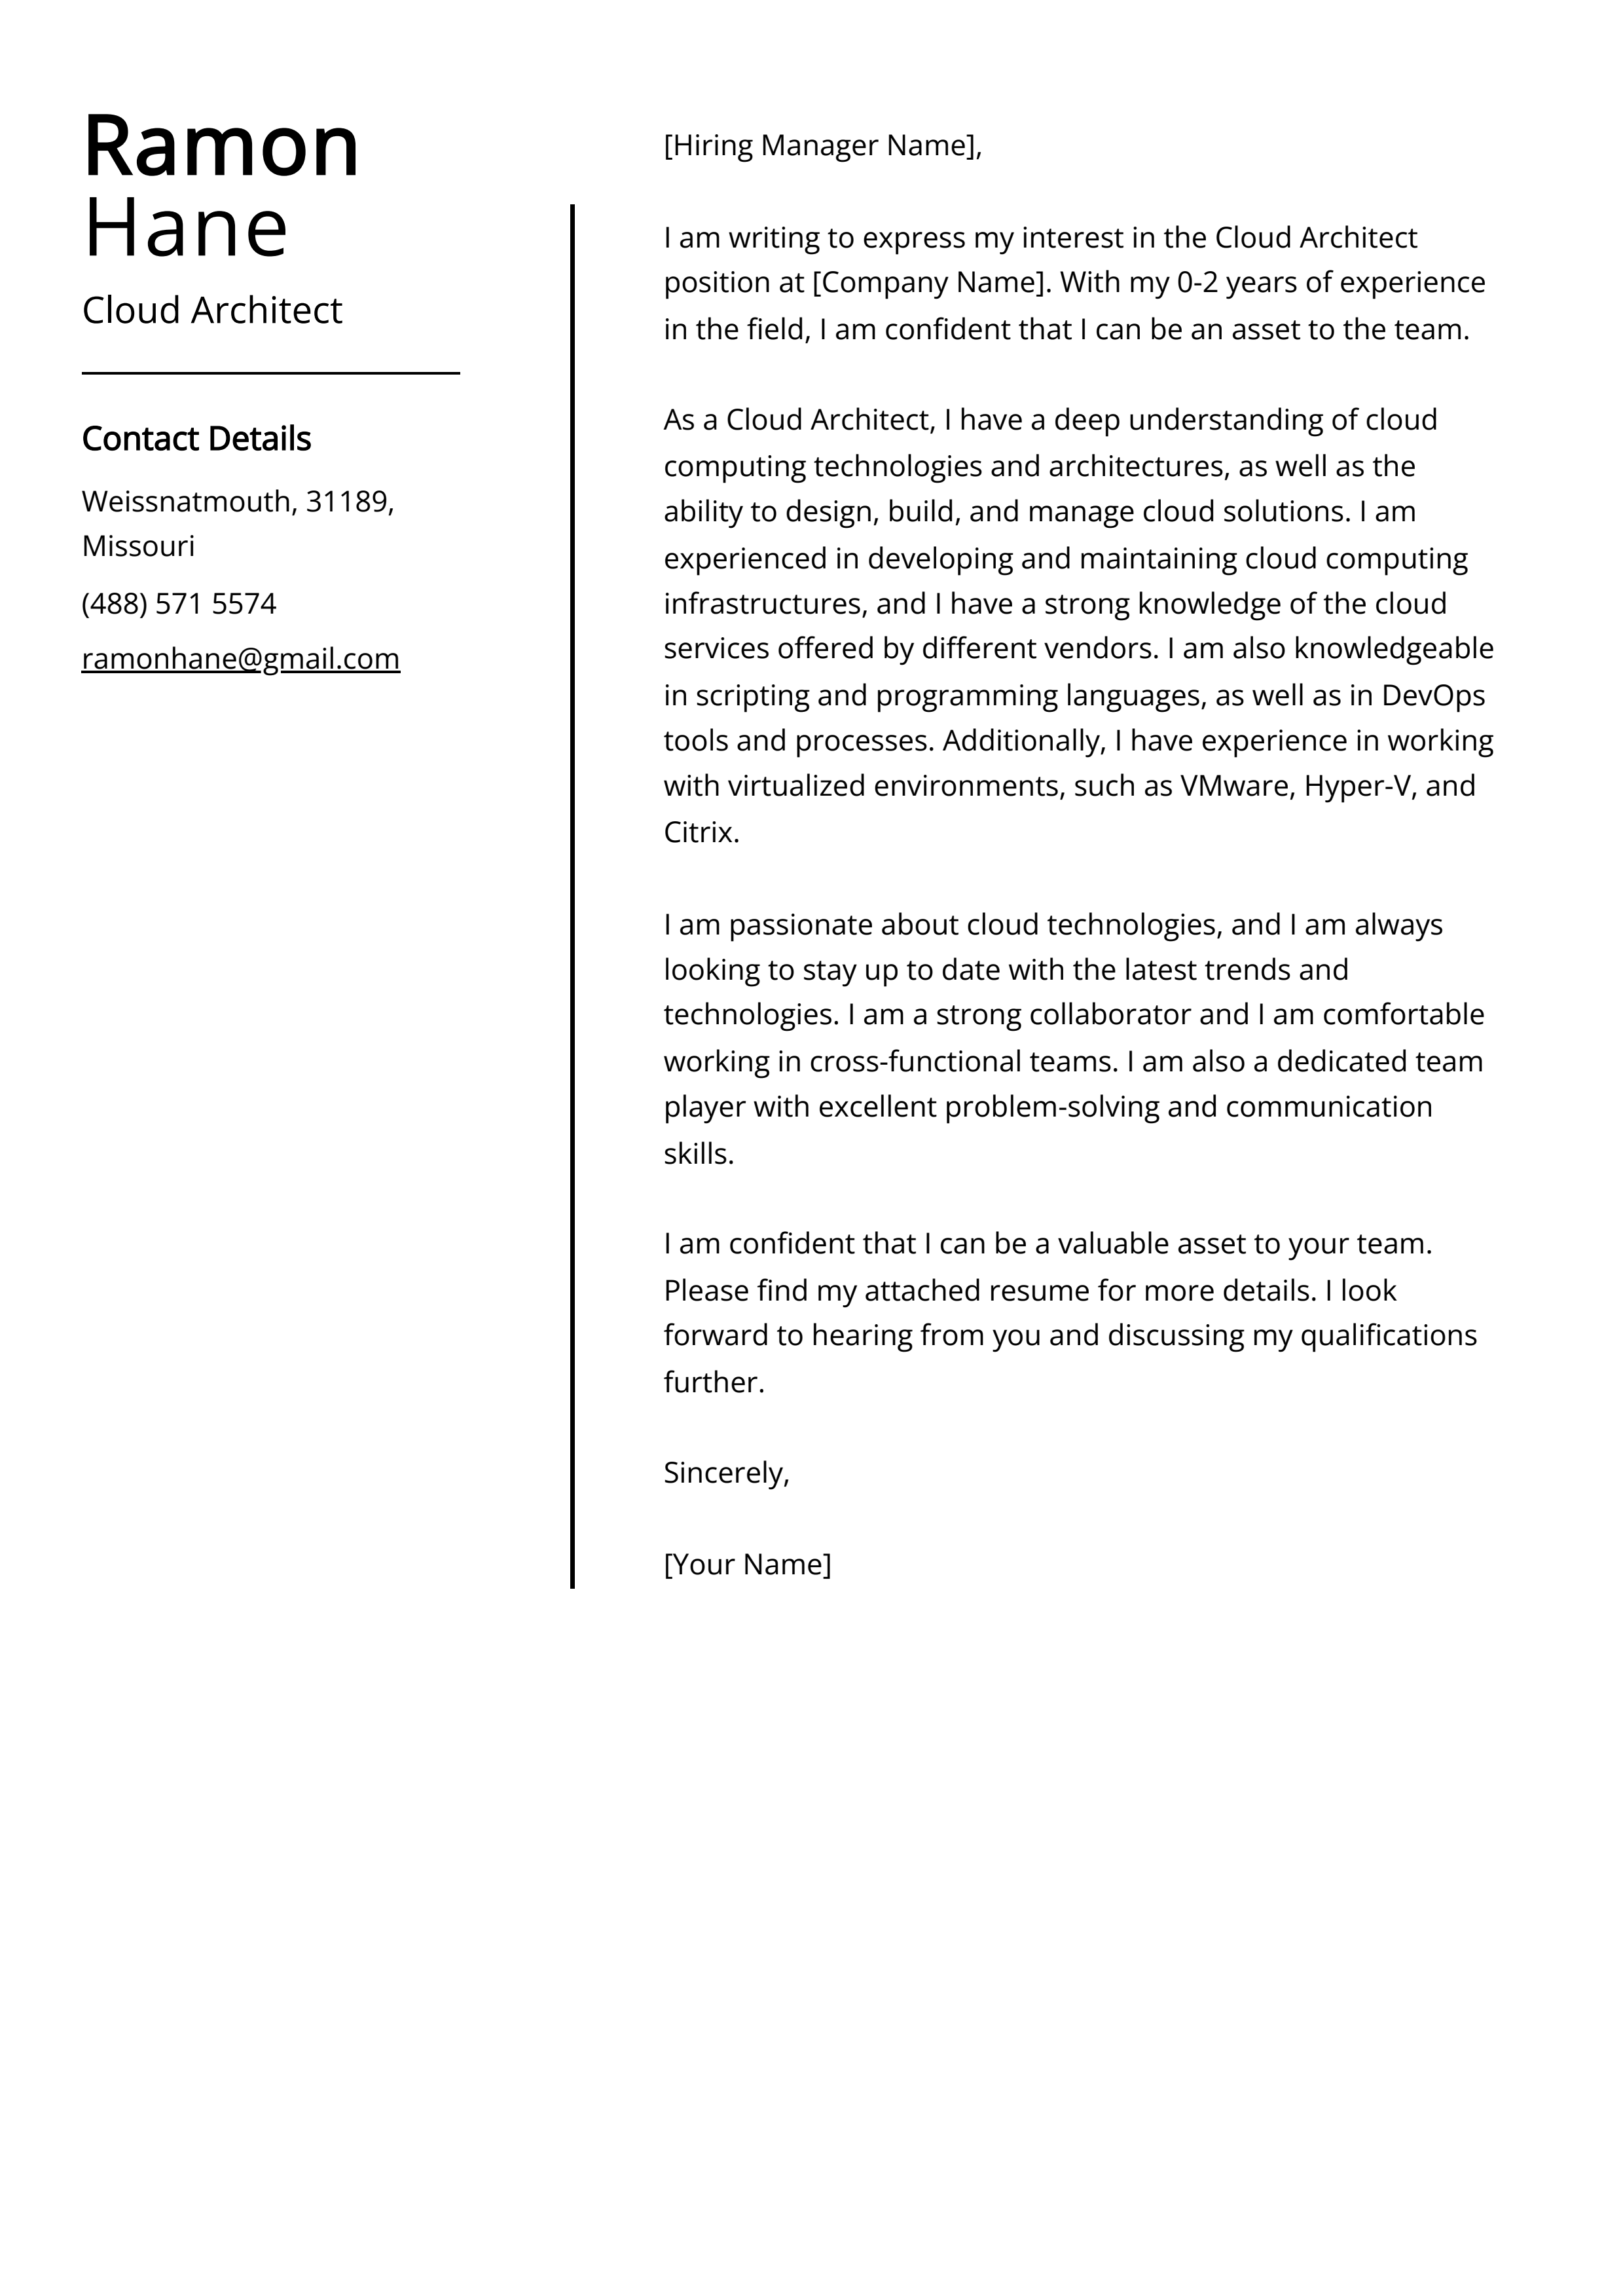 Cloud Architect Cover Letter Example